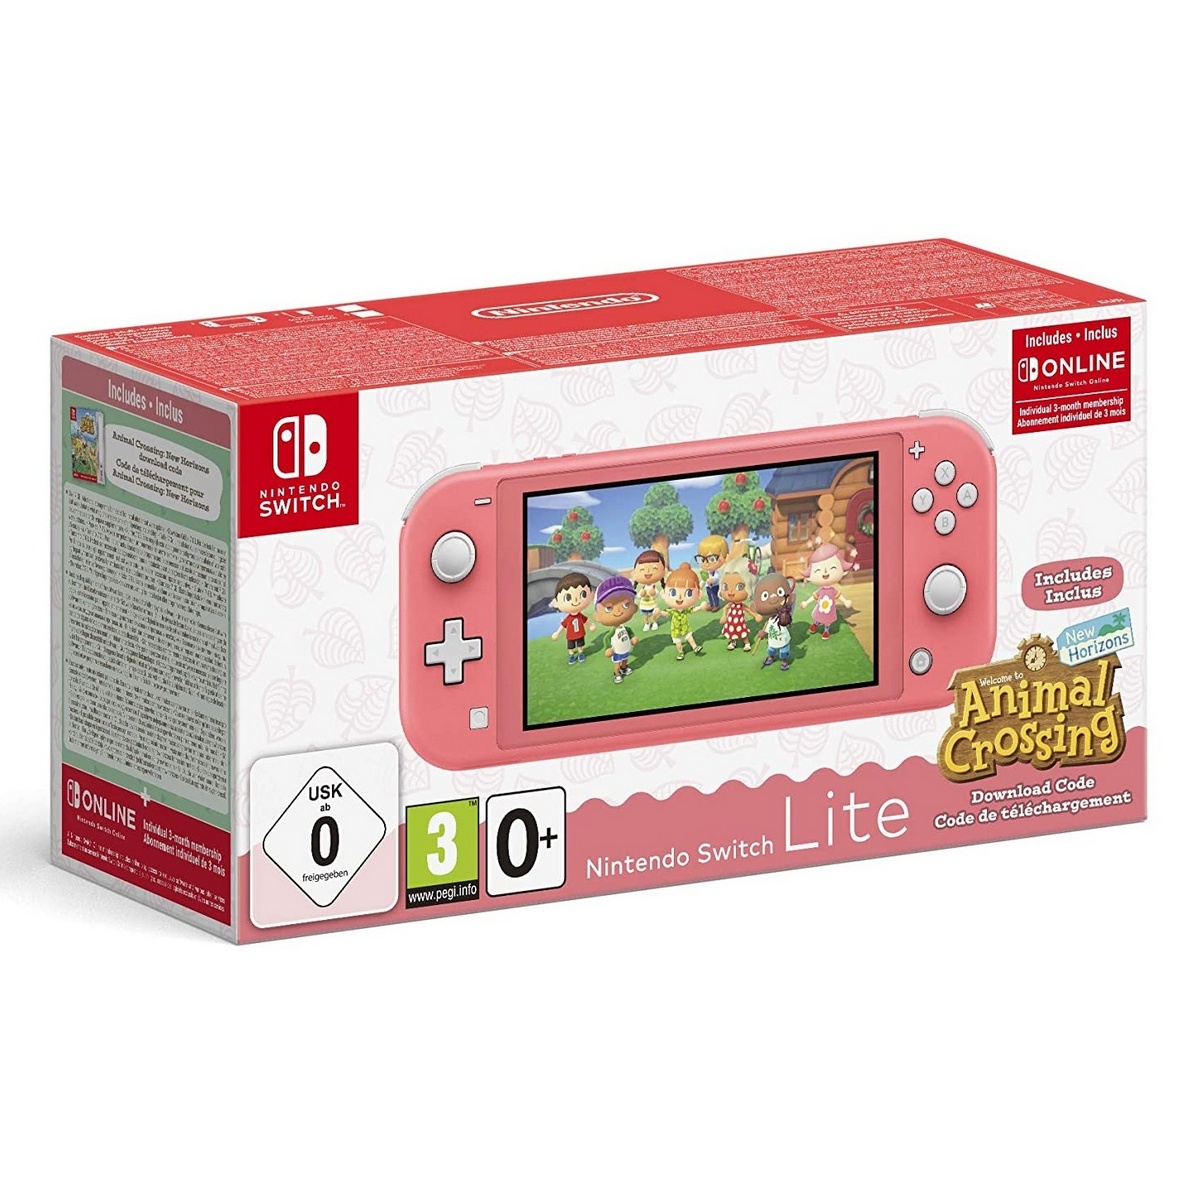 Nintendo Switch Lite - Coral incl. Animal Crossing: New Horizons